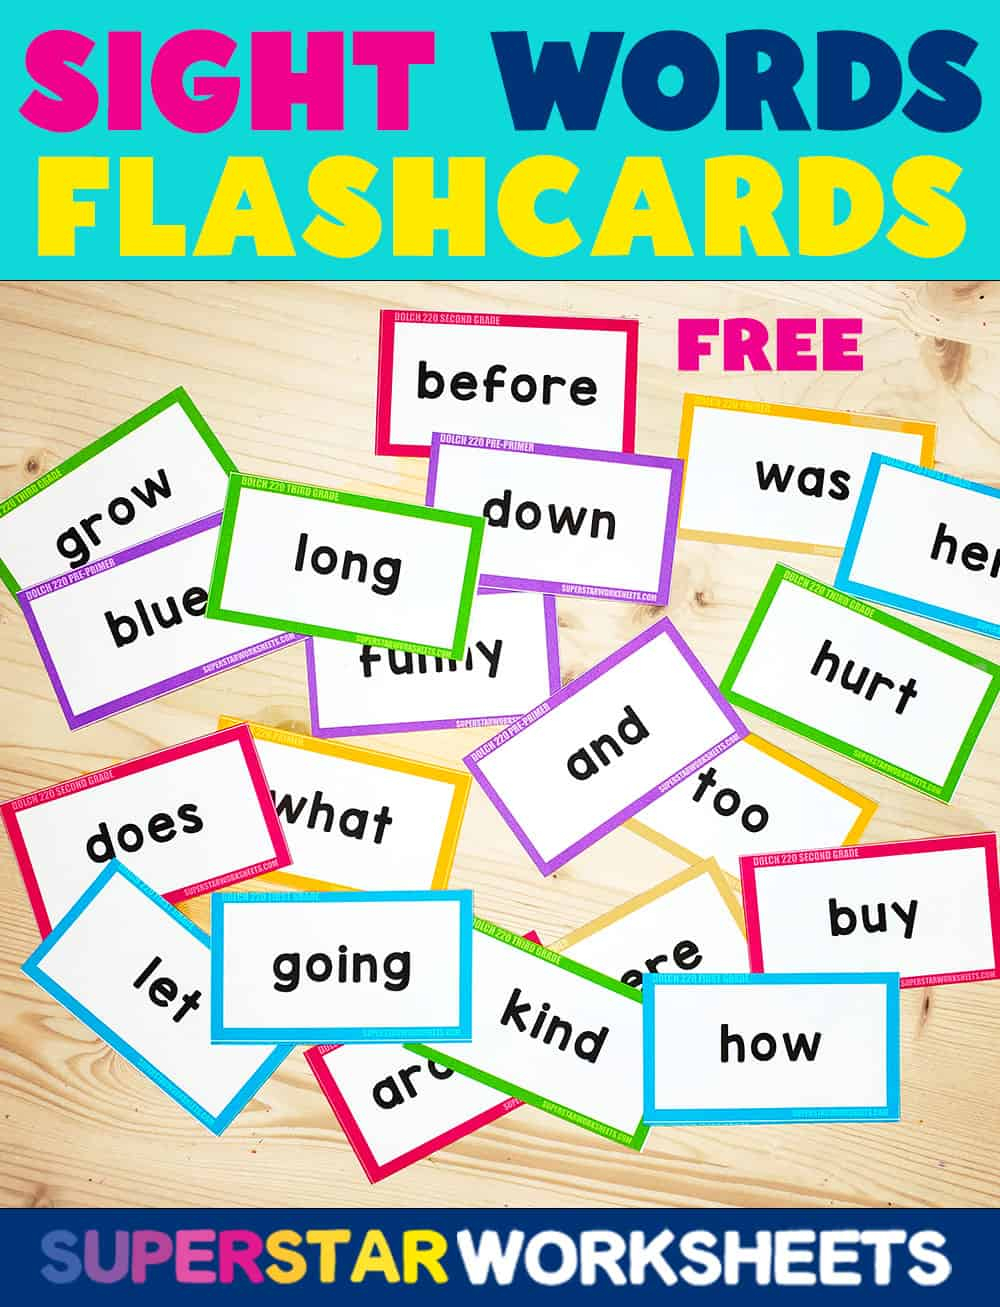 Sight Word Flashcards - Superstar Worksheets - Free Printable 2Nd Grade Sight Words Flash Cards